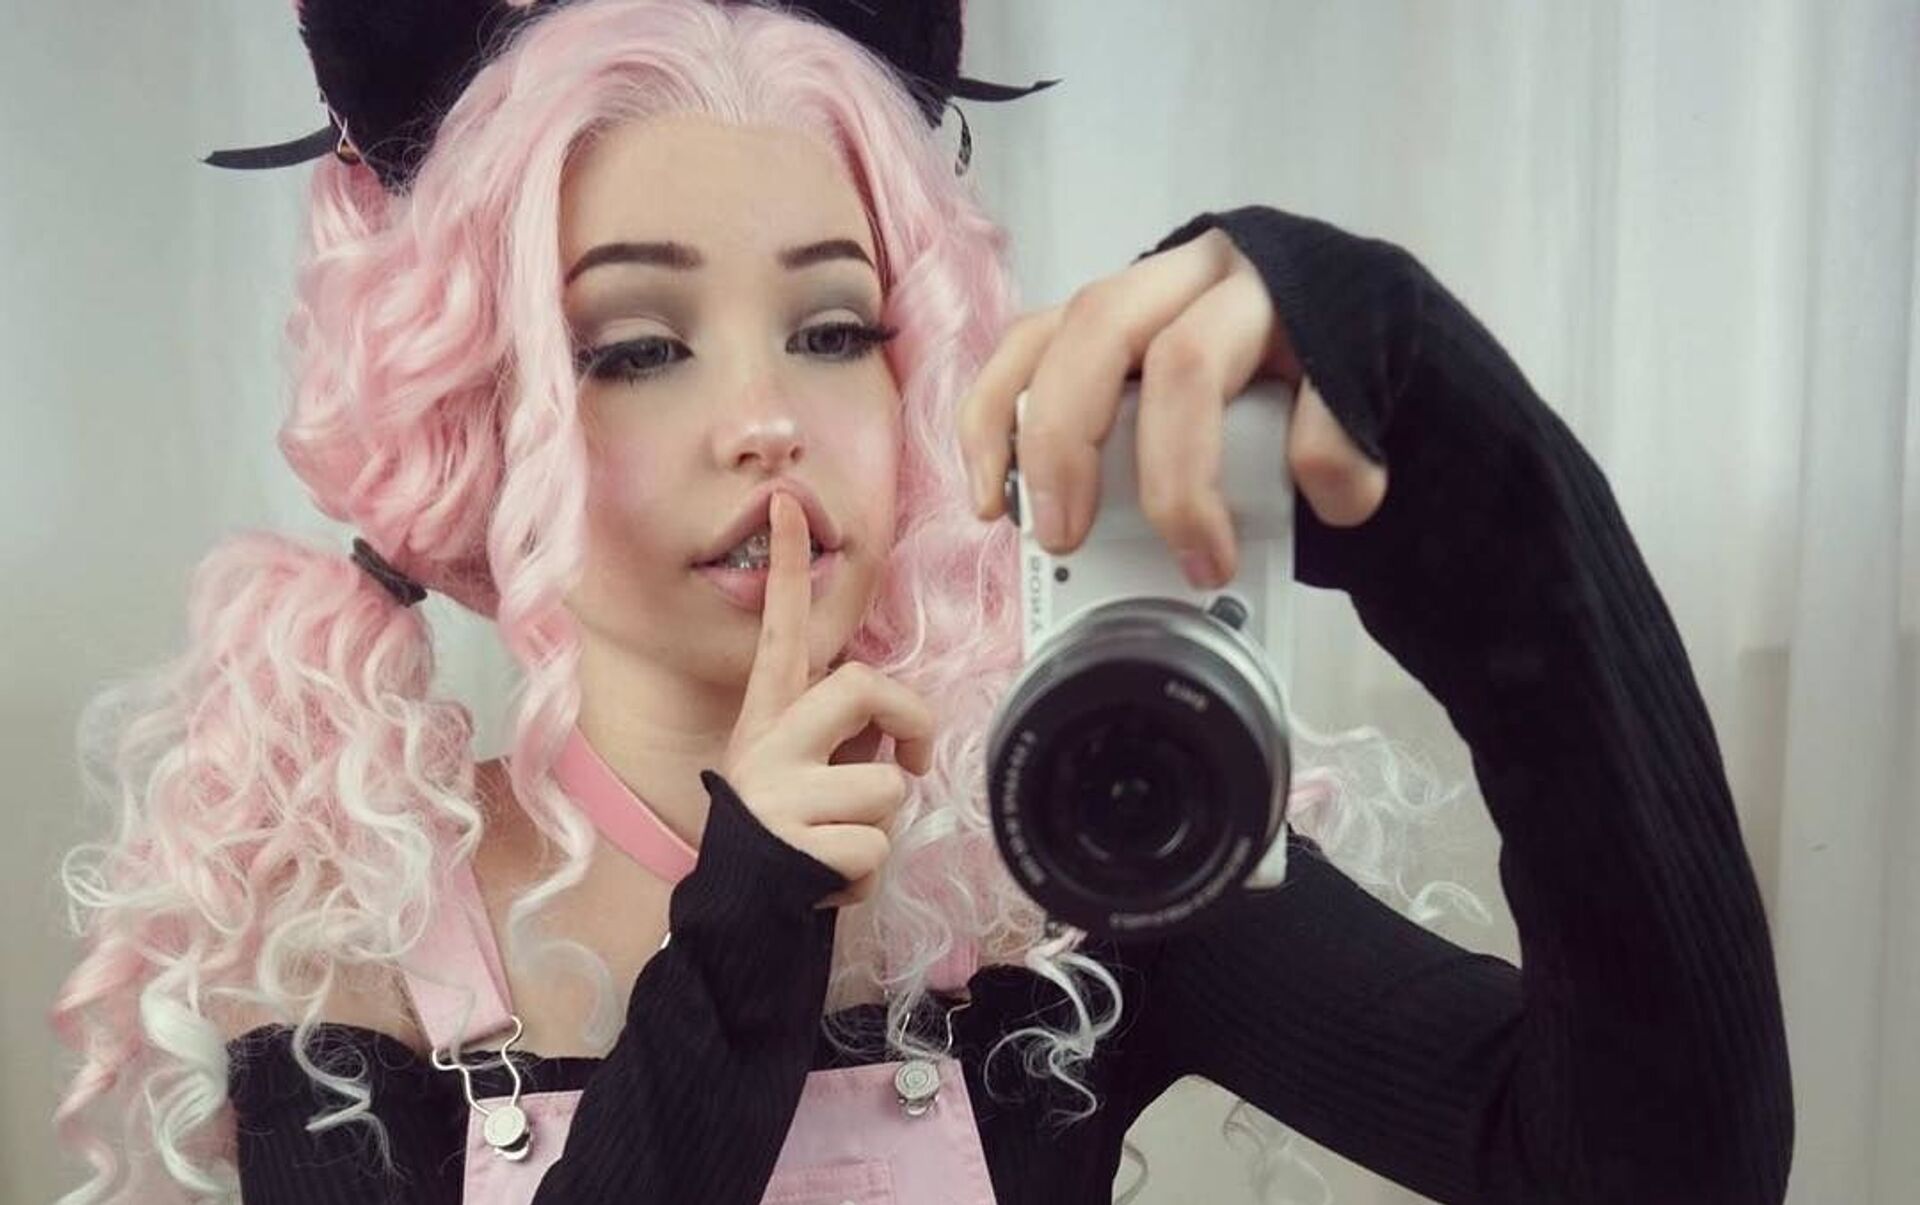 Why OnlyFans Millionaire Belle Delphine Dropped Out of School at 14